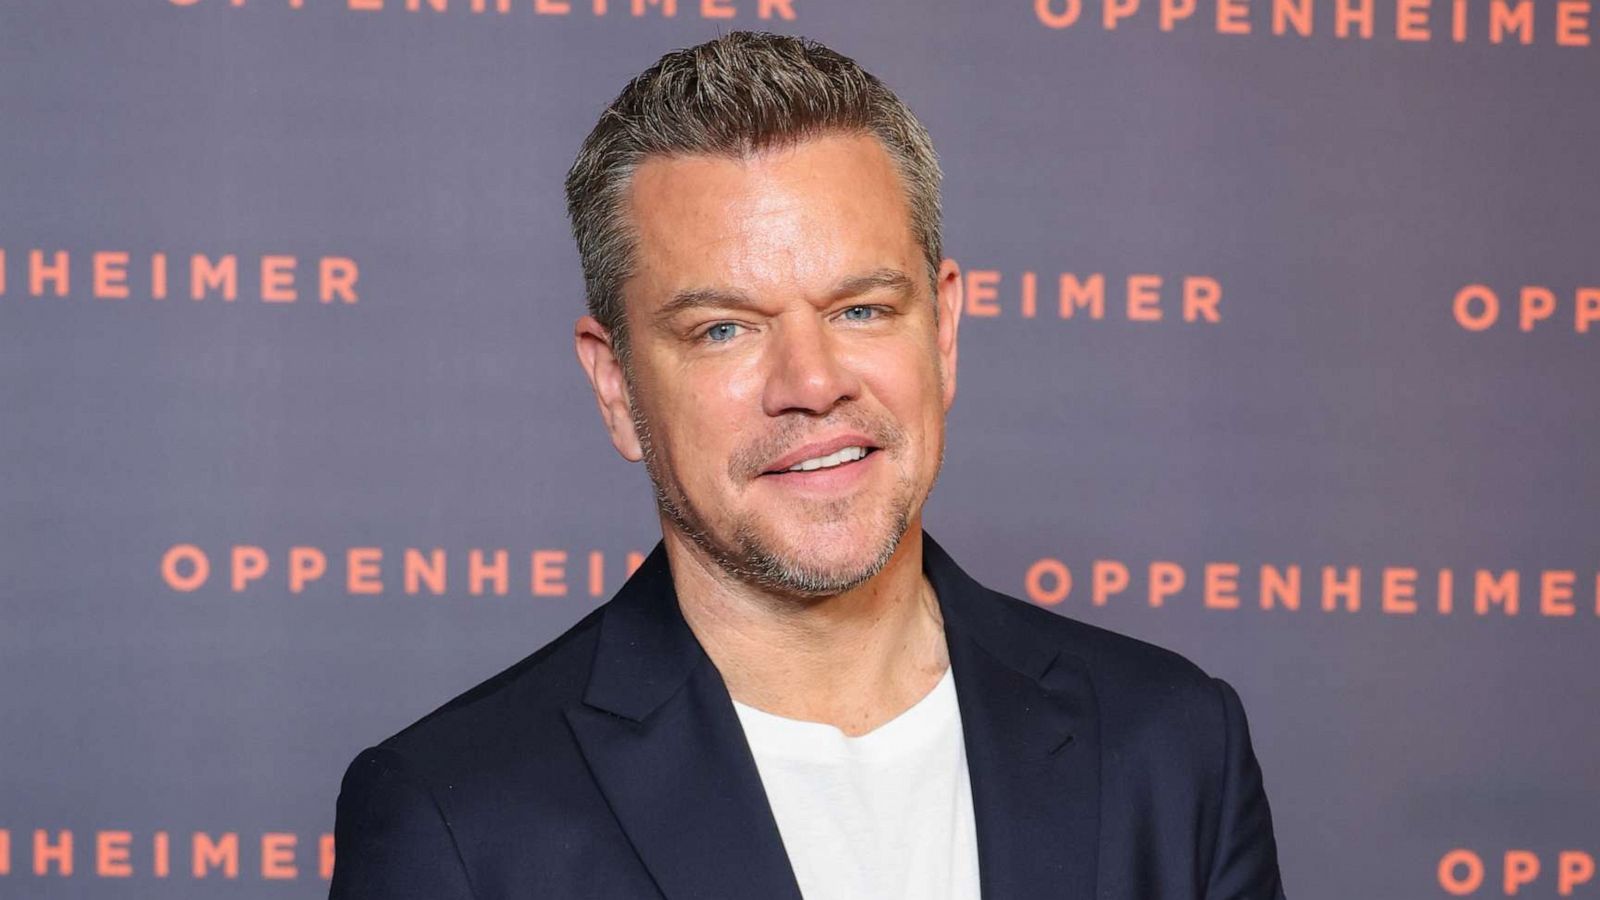 Matt Damon Gives Behind The Scenes Details Of DunKings Super Bowl Ad